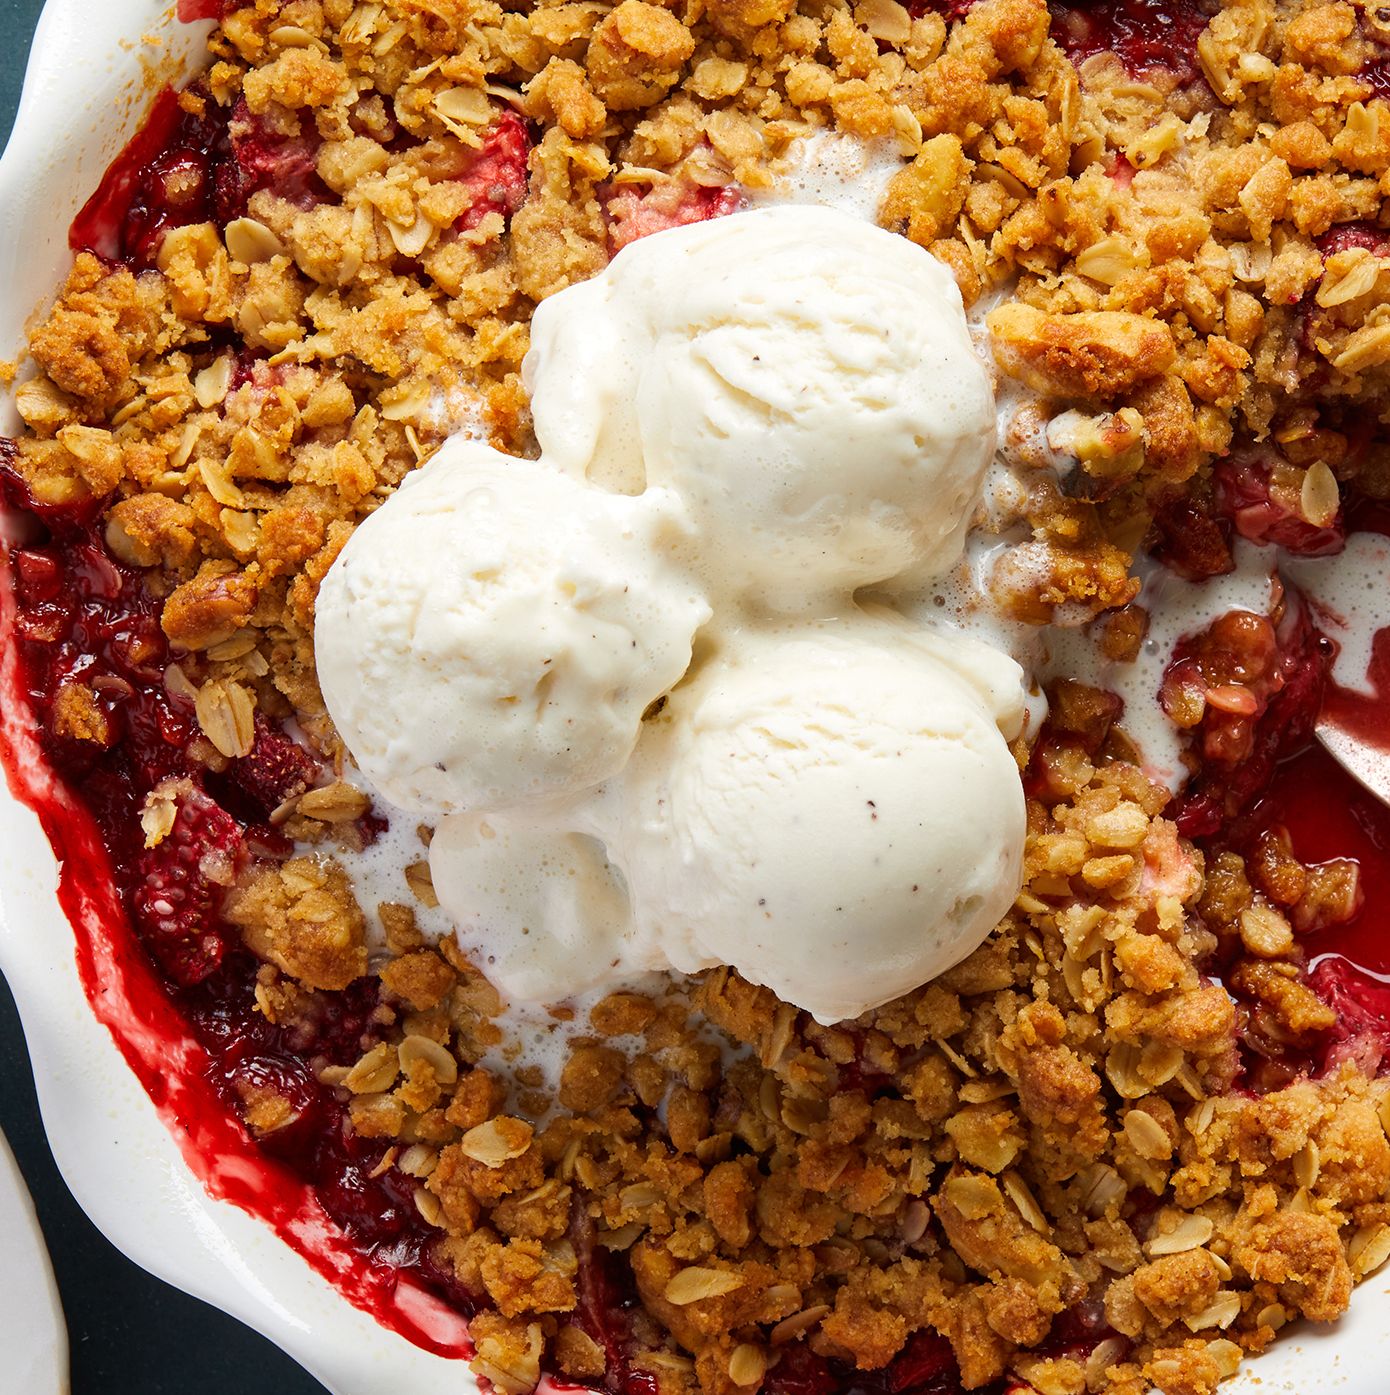 A Strawberry Crisp Is The Perfect Think To Make With A Bounty Of Summer Fruit